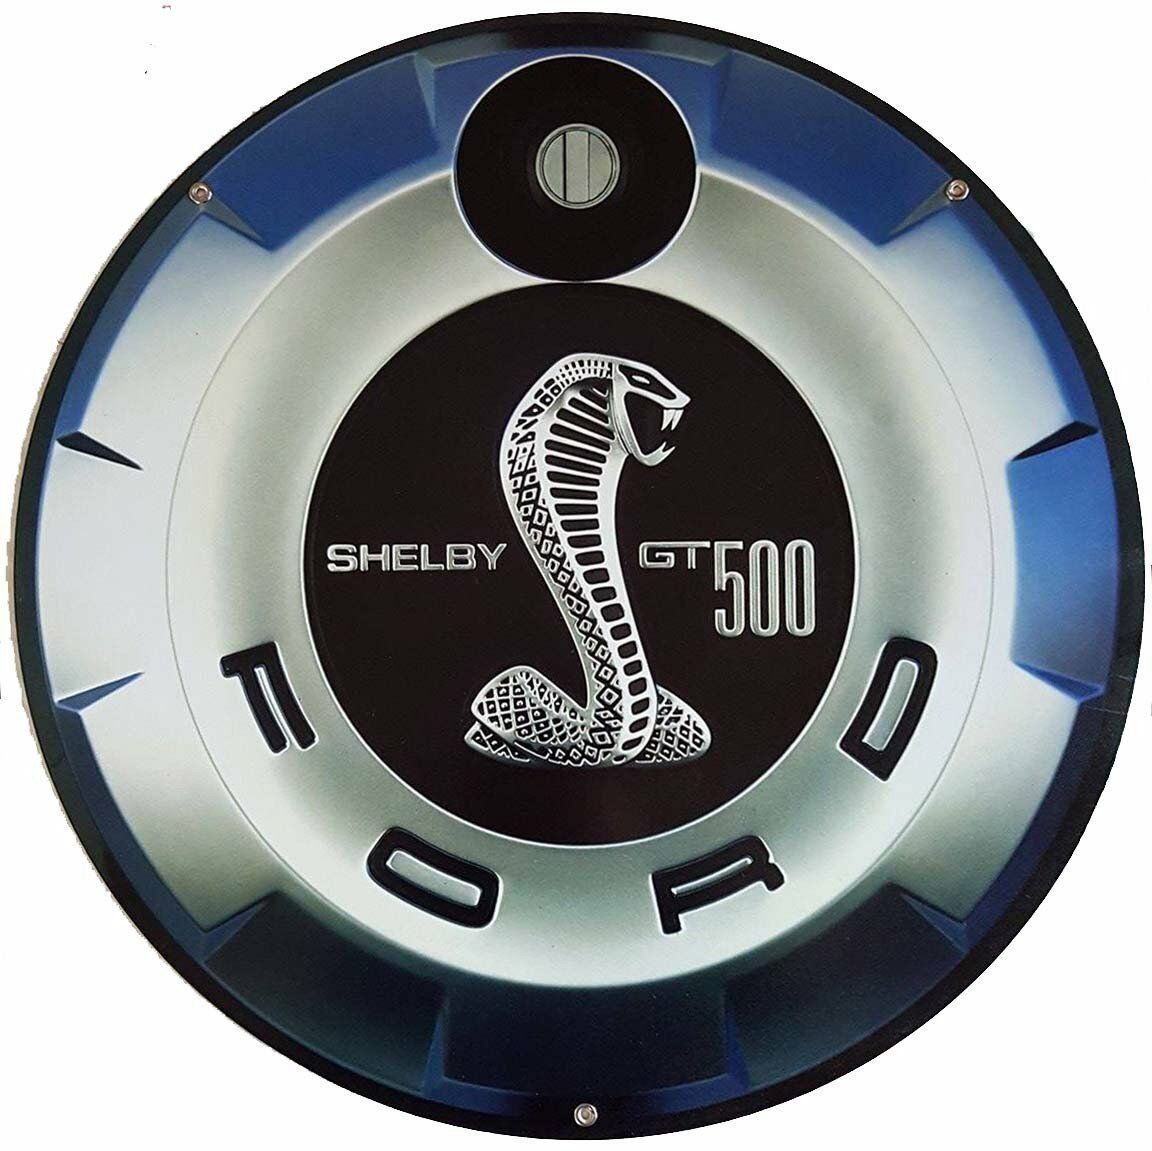 Shelby Gt 500 22" Round Gas Cap Metal Sign - $98.00